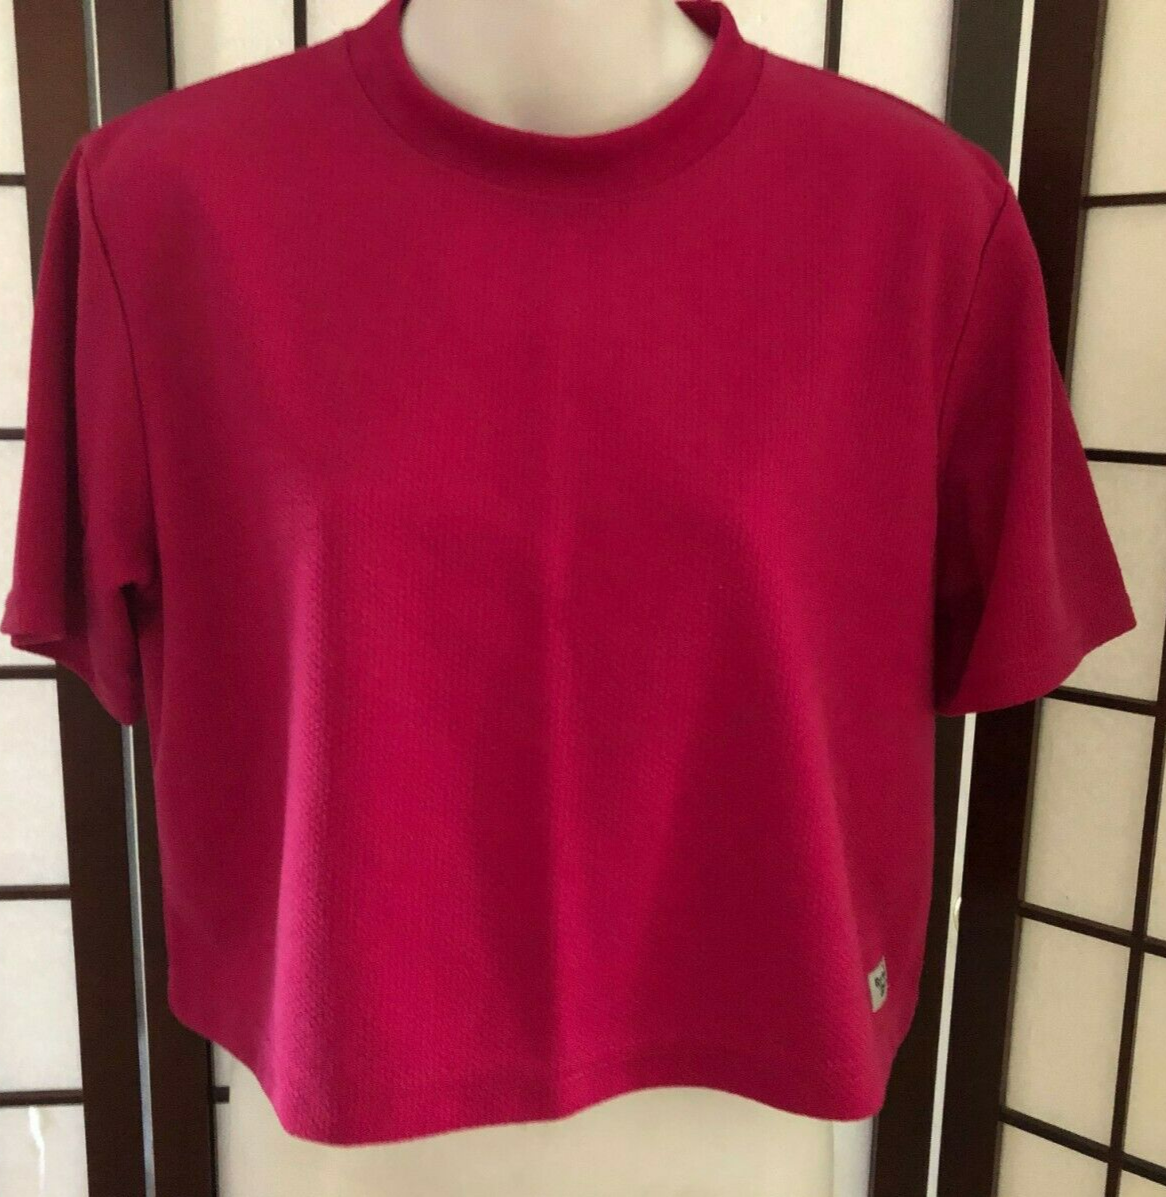 Vintage 90s Reebok Exercise Workout Athletic pink Gym cropped...